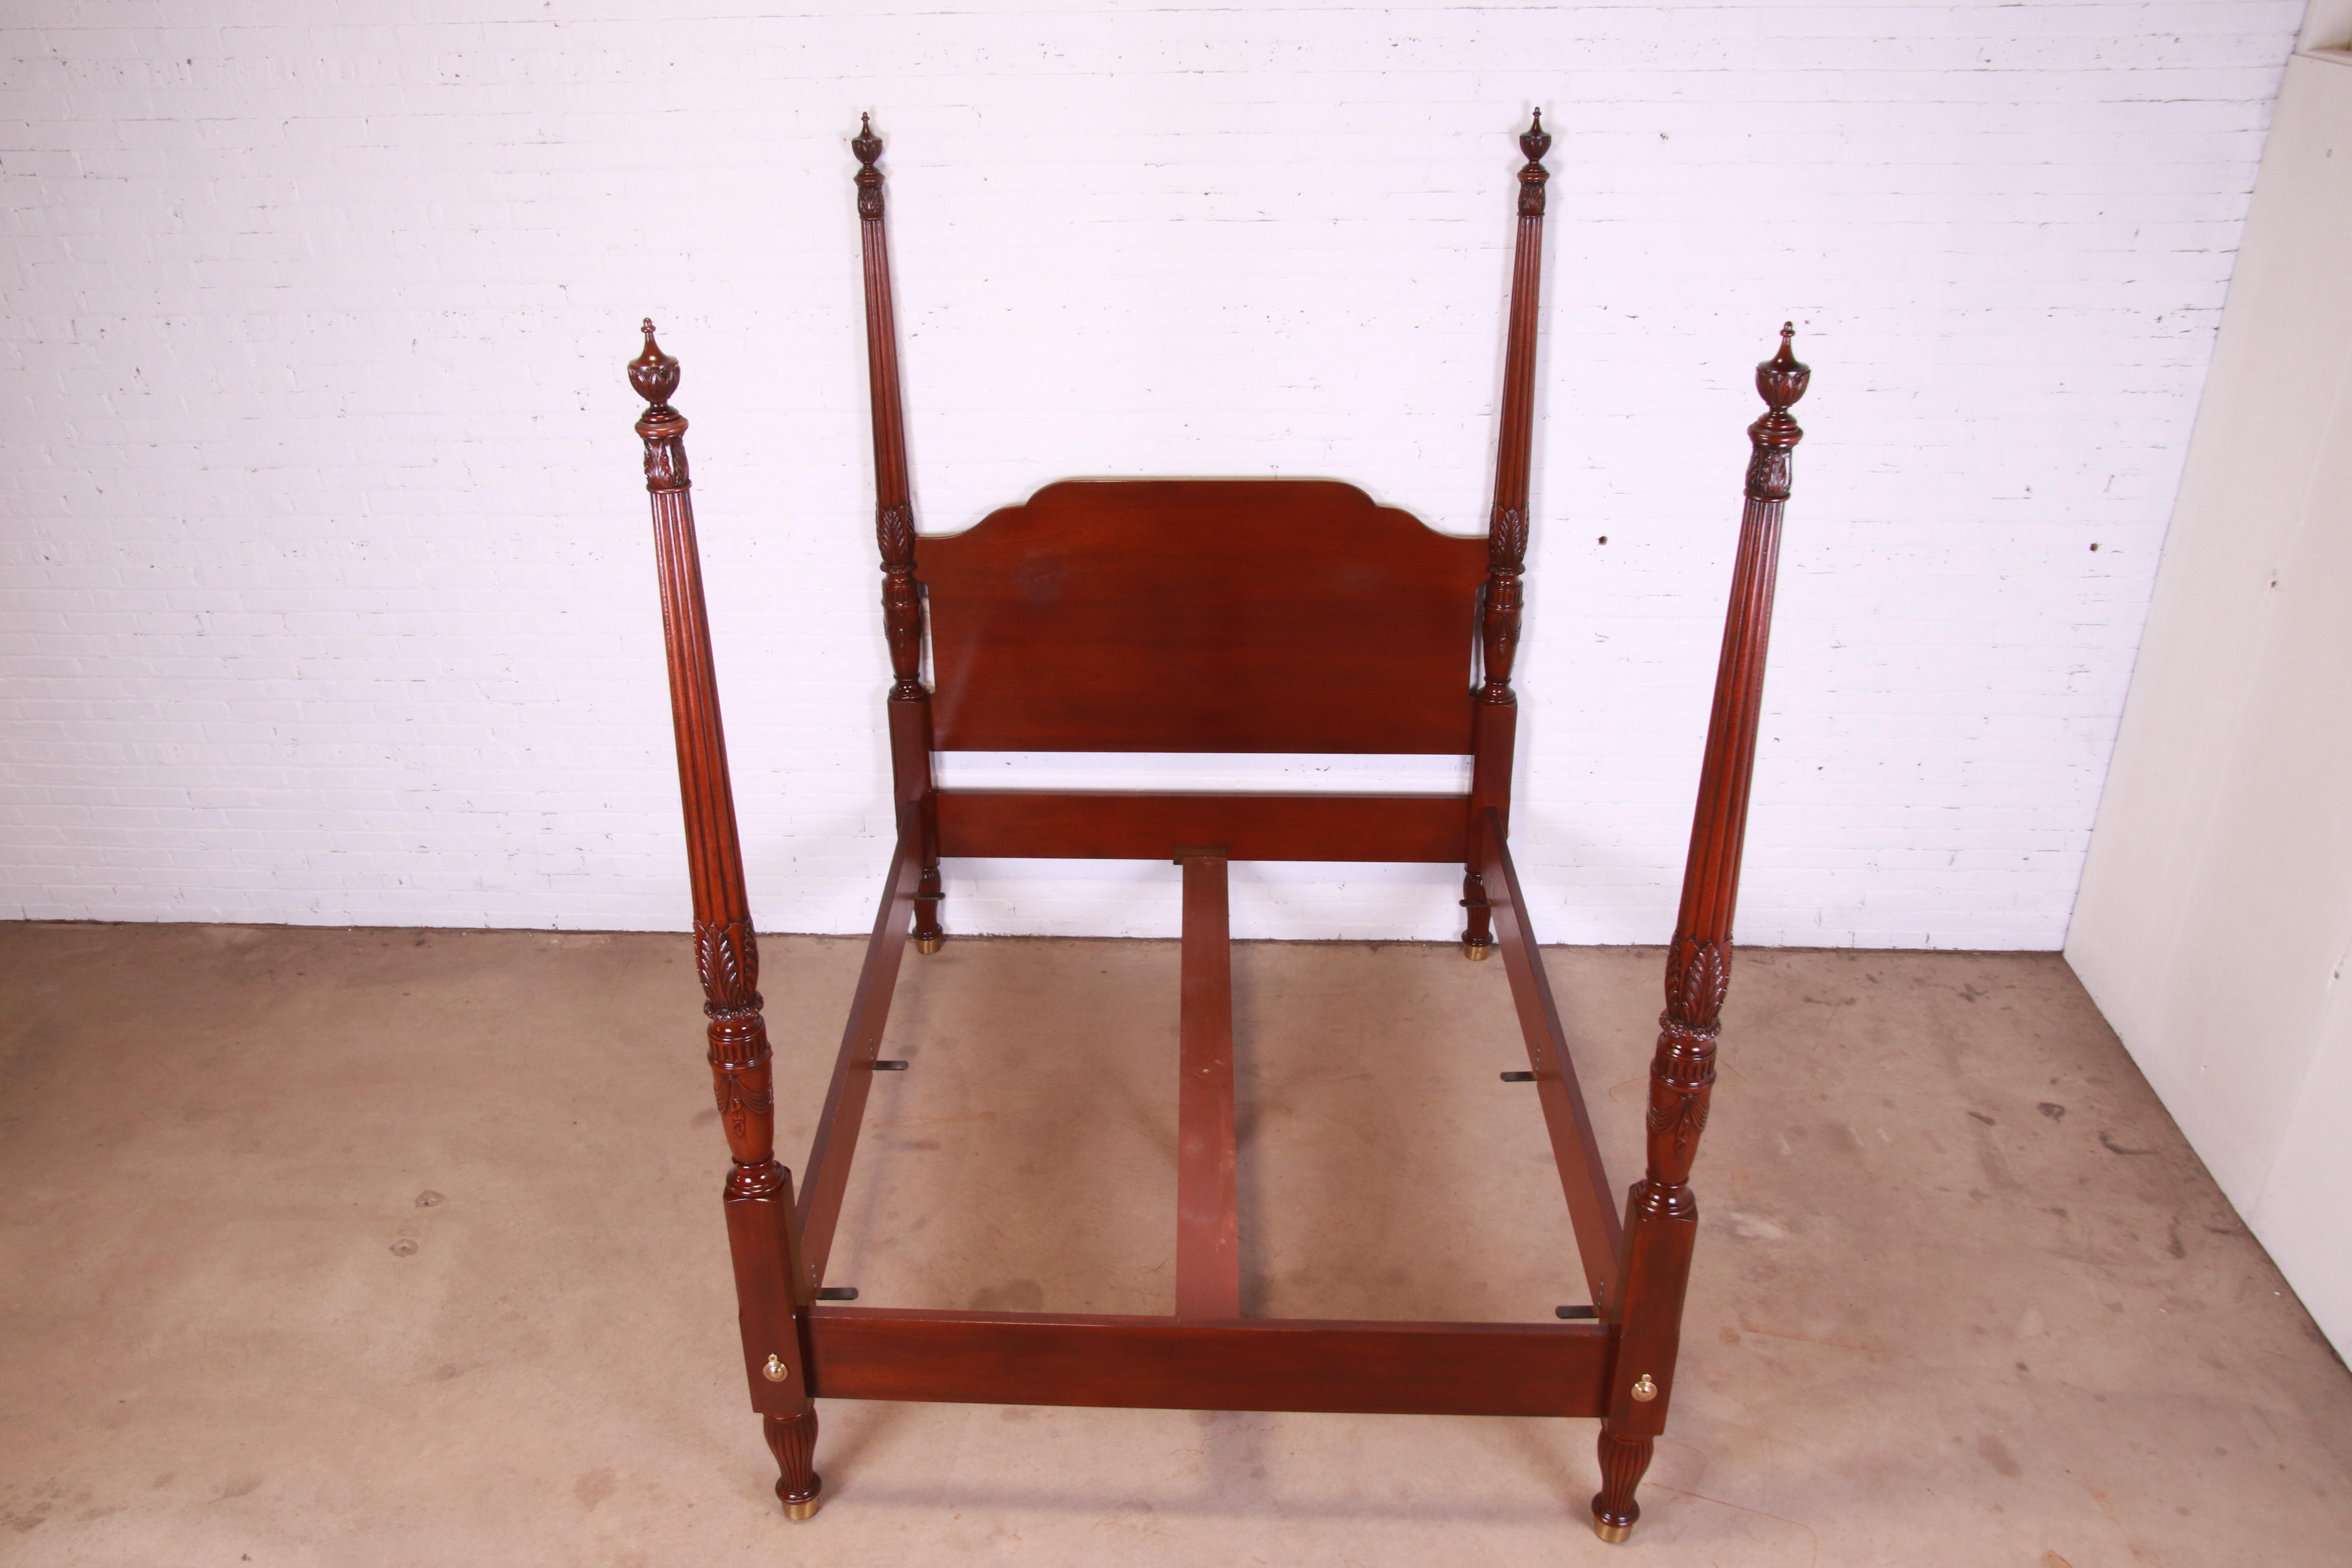 A gorgeous Georgian or Chippendale style four-poster queen size bed.

By Baker Furniture, 